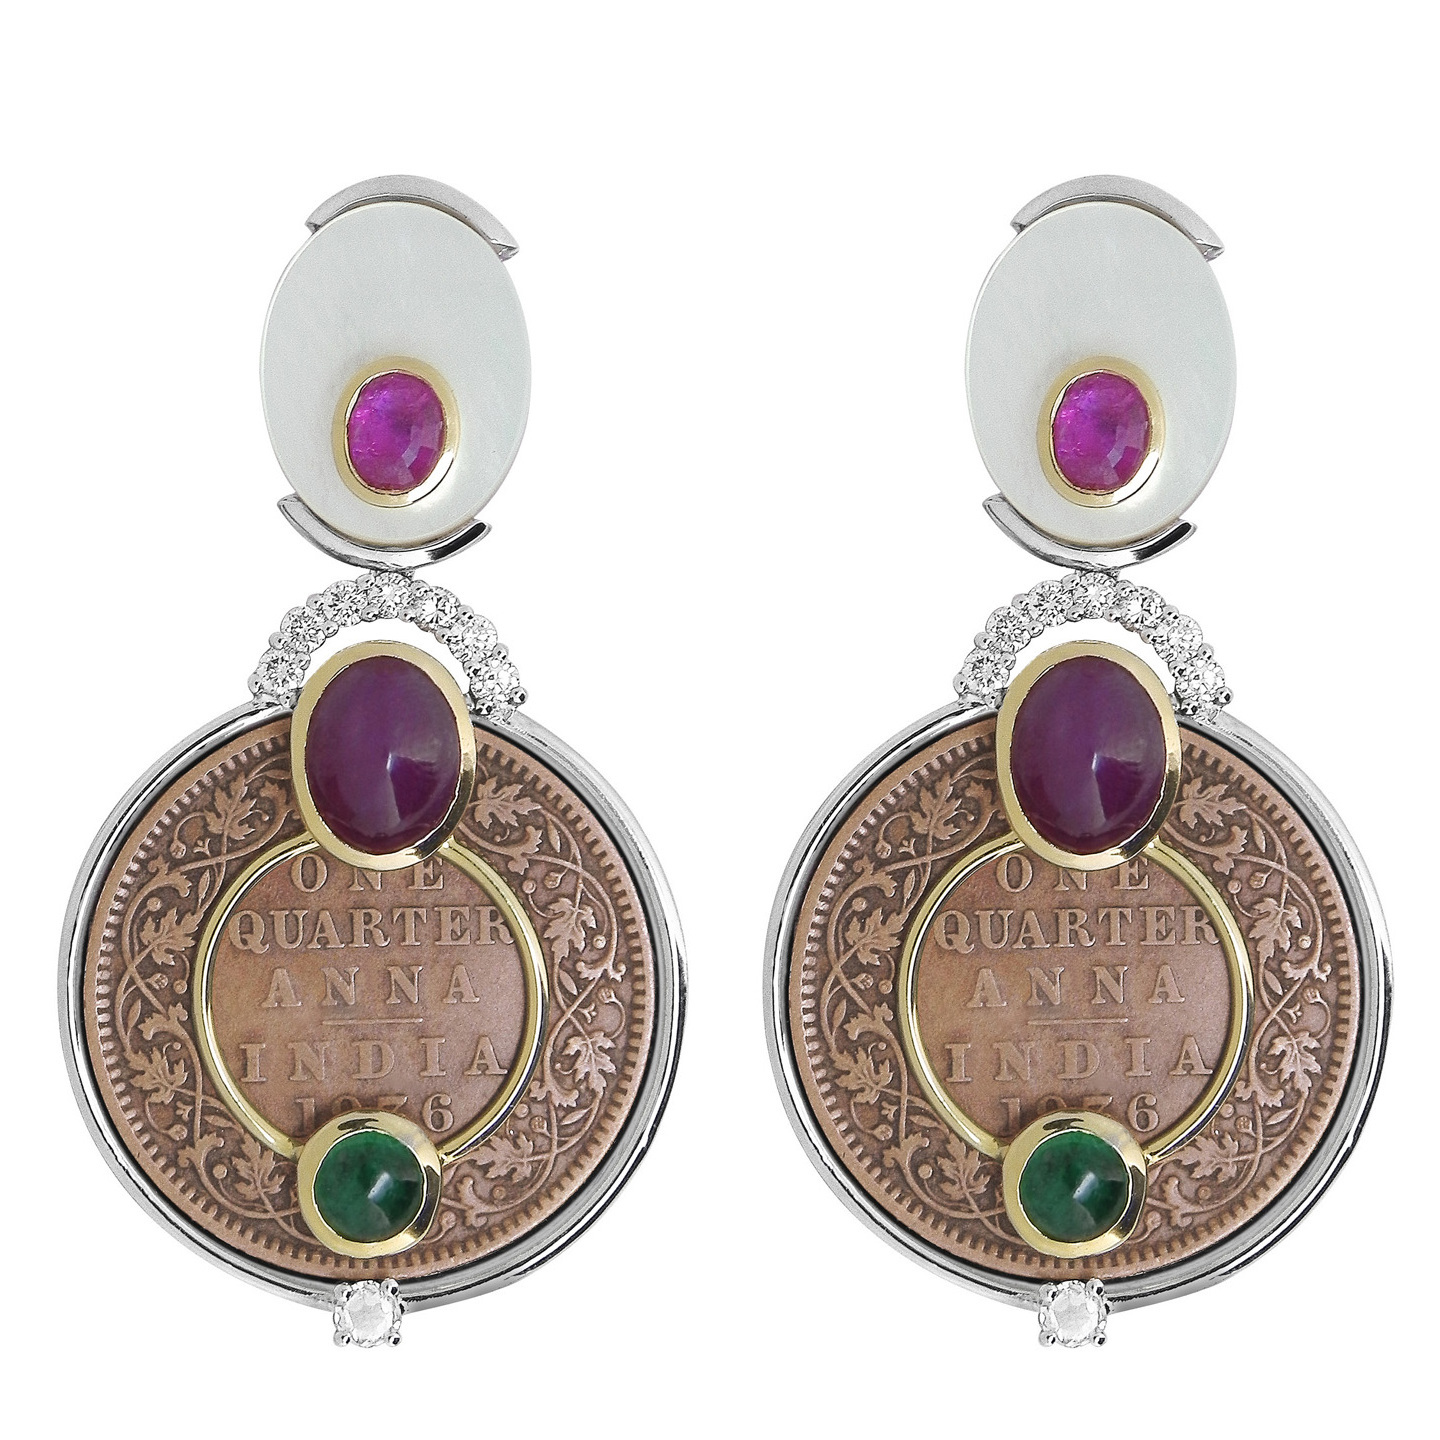 Impressive copper coin earrings in mix metal and gemstones